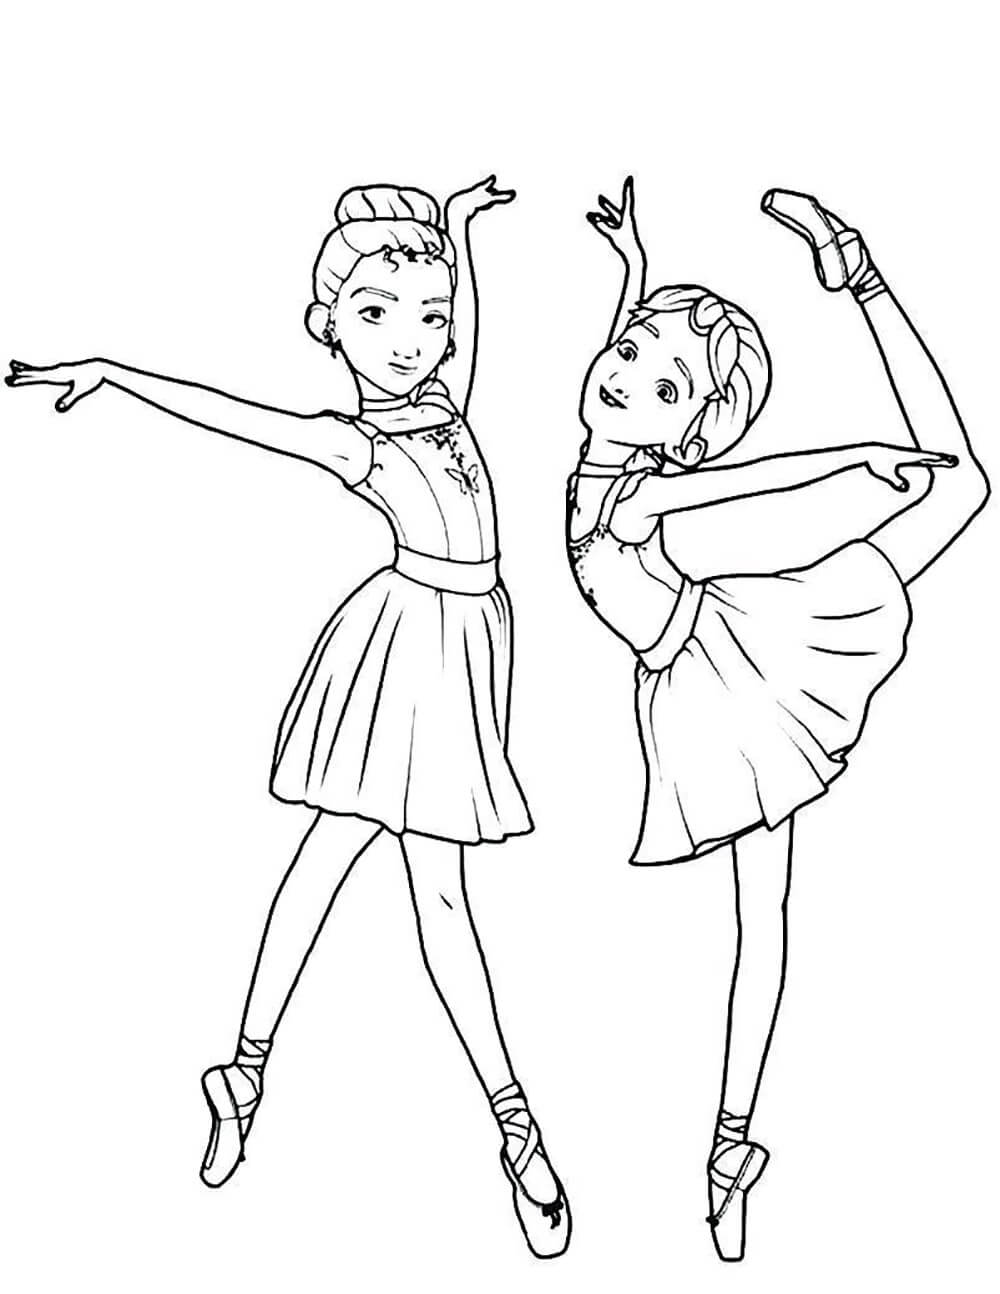 cute-ballerina-coloring-page-free-printable-coloring-pages-for-kids